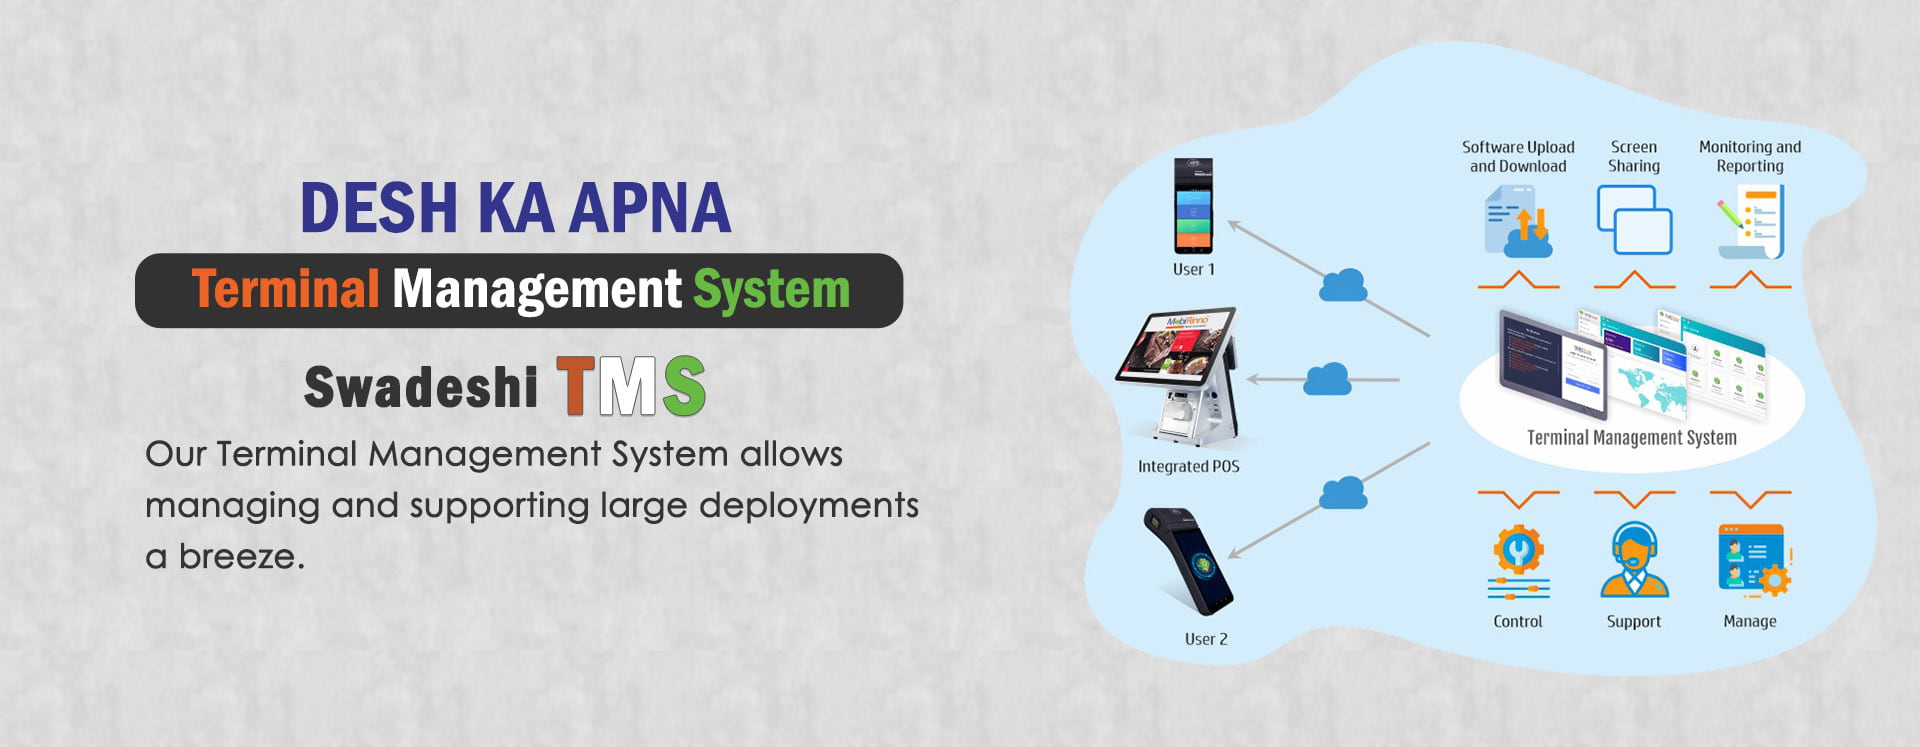 Control | Manage| Support - Terminal Management System